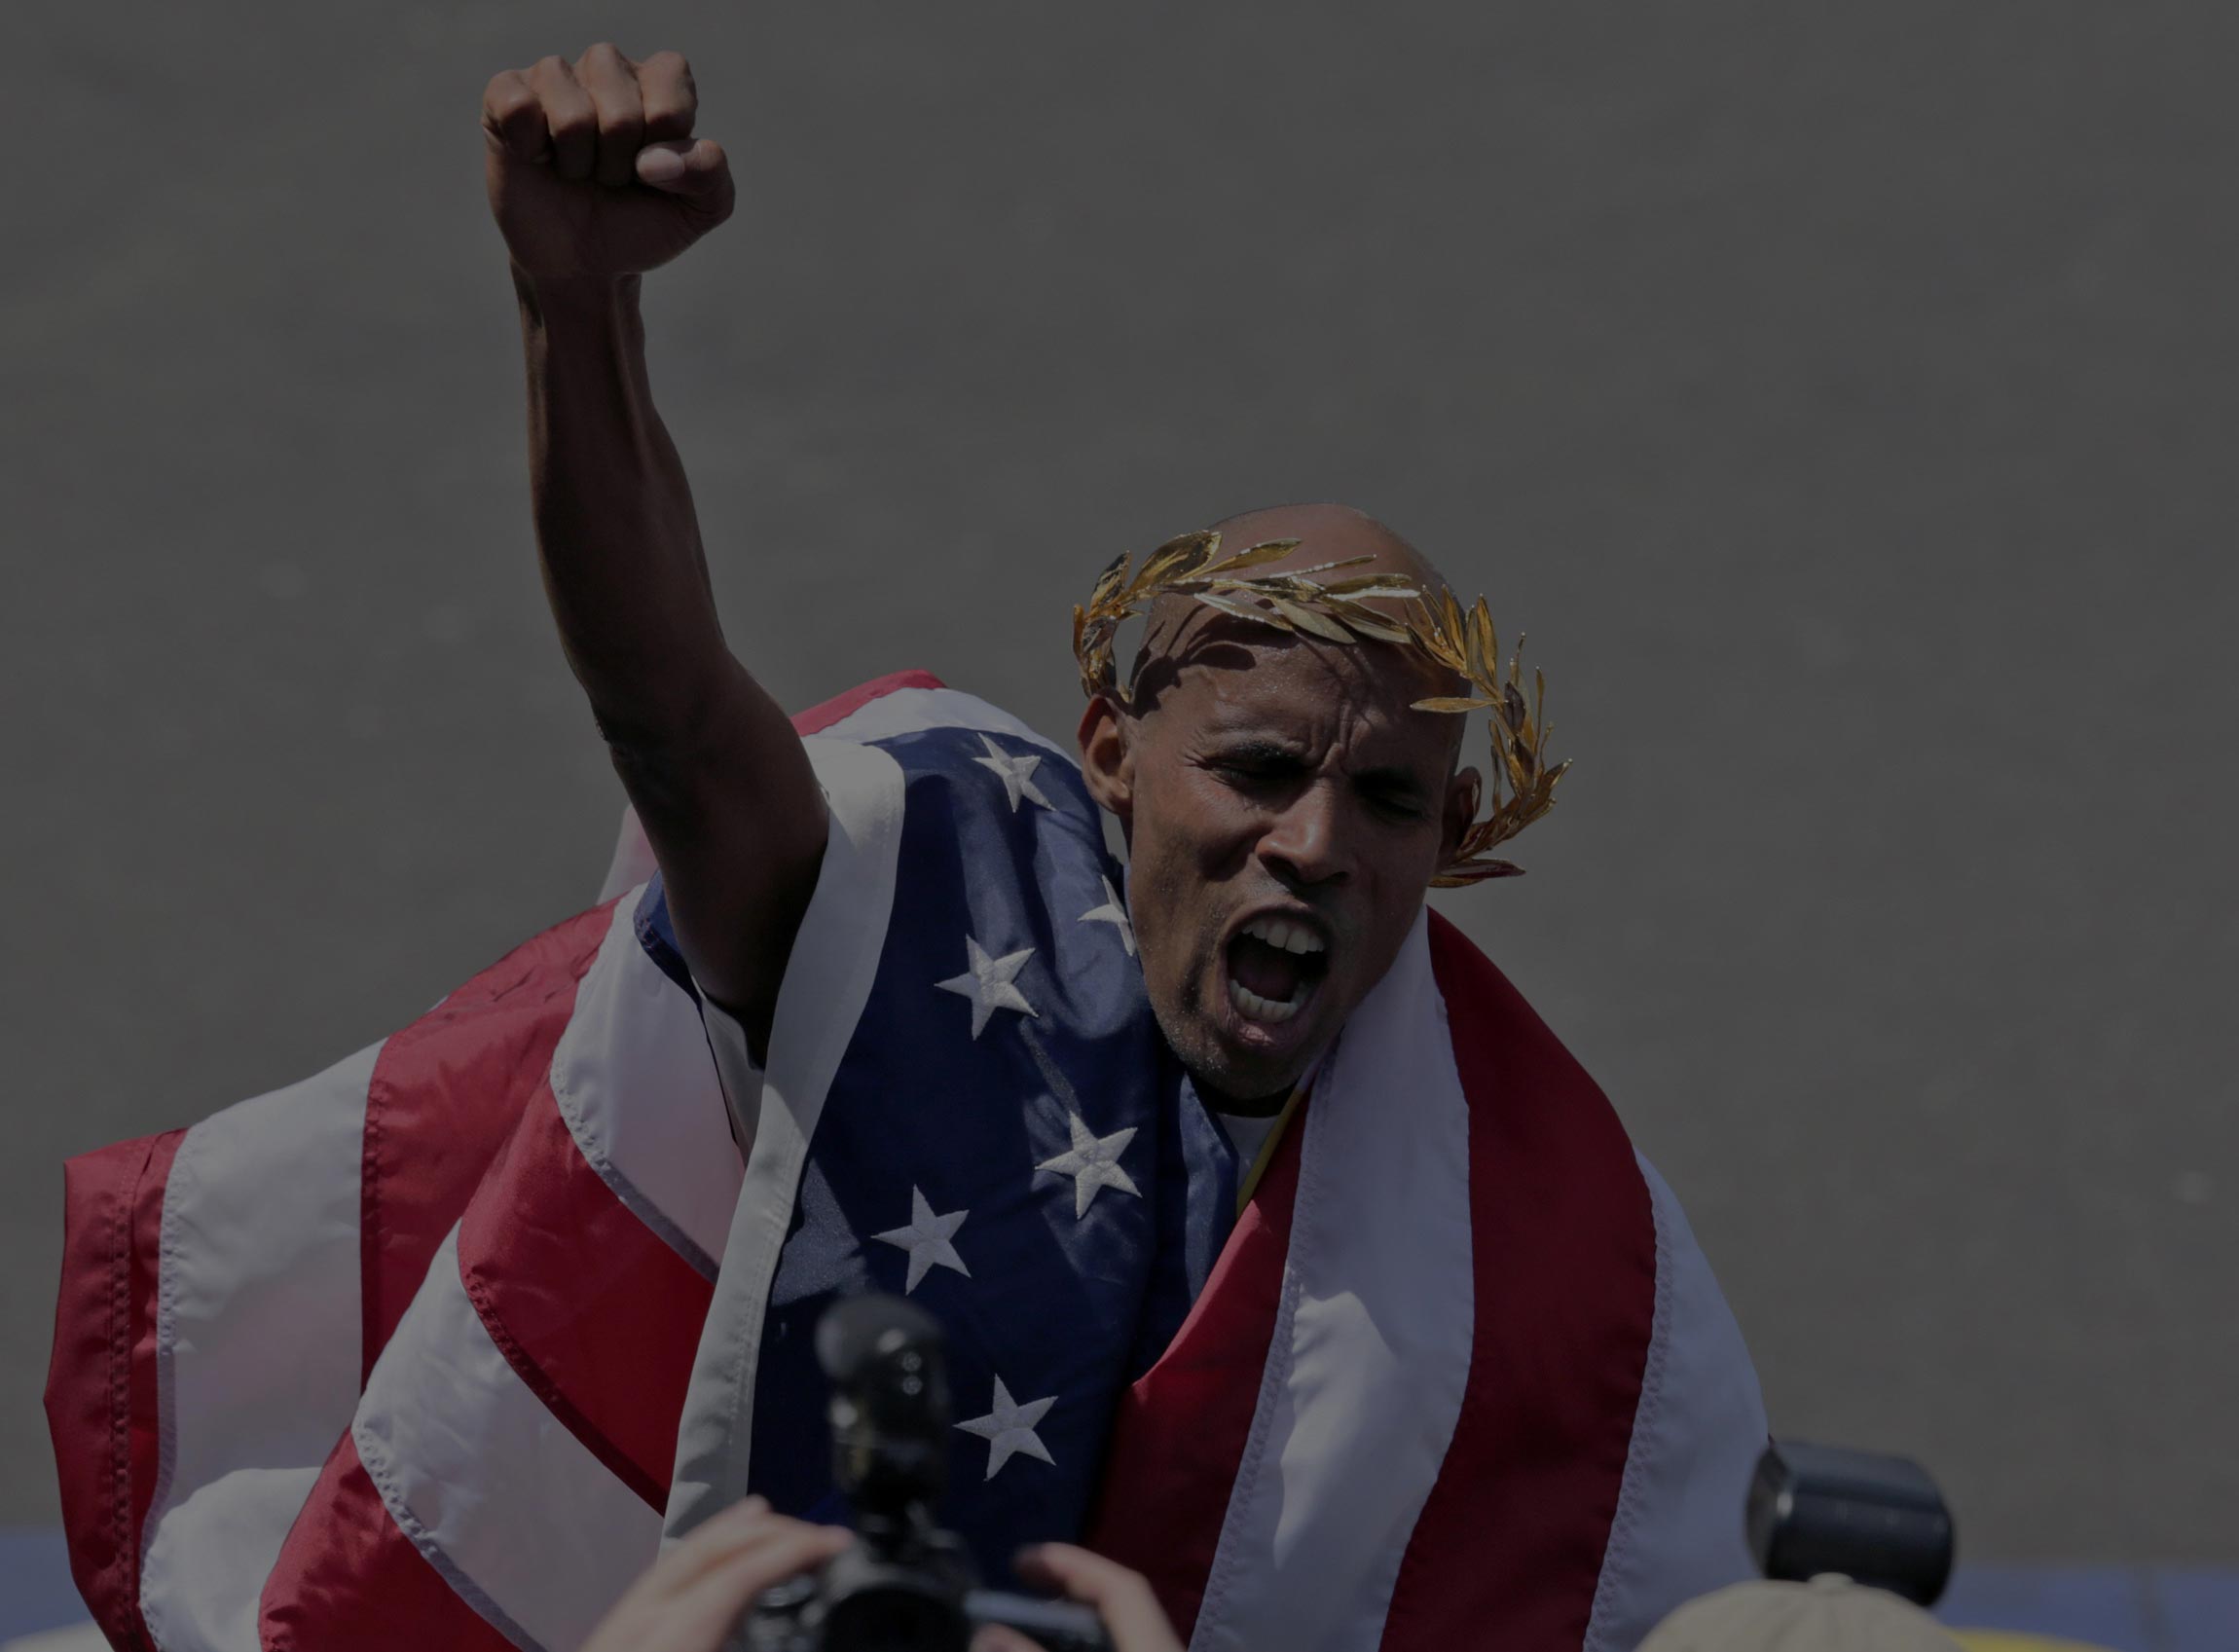 Meb extends fist in celebration